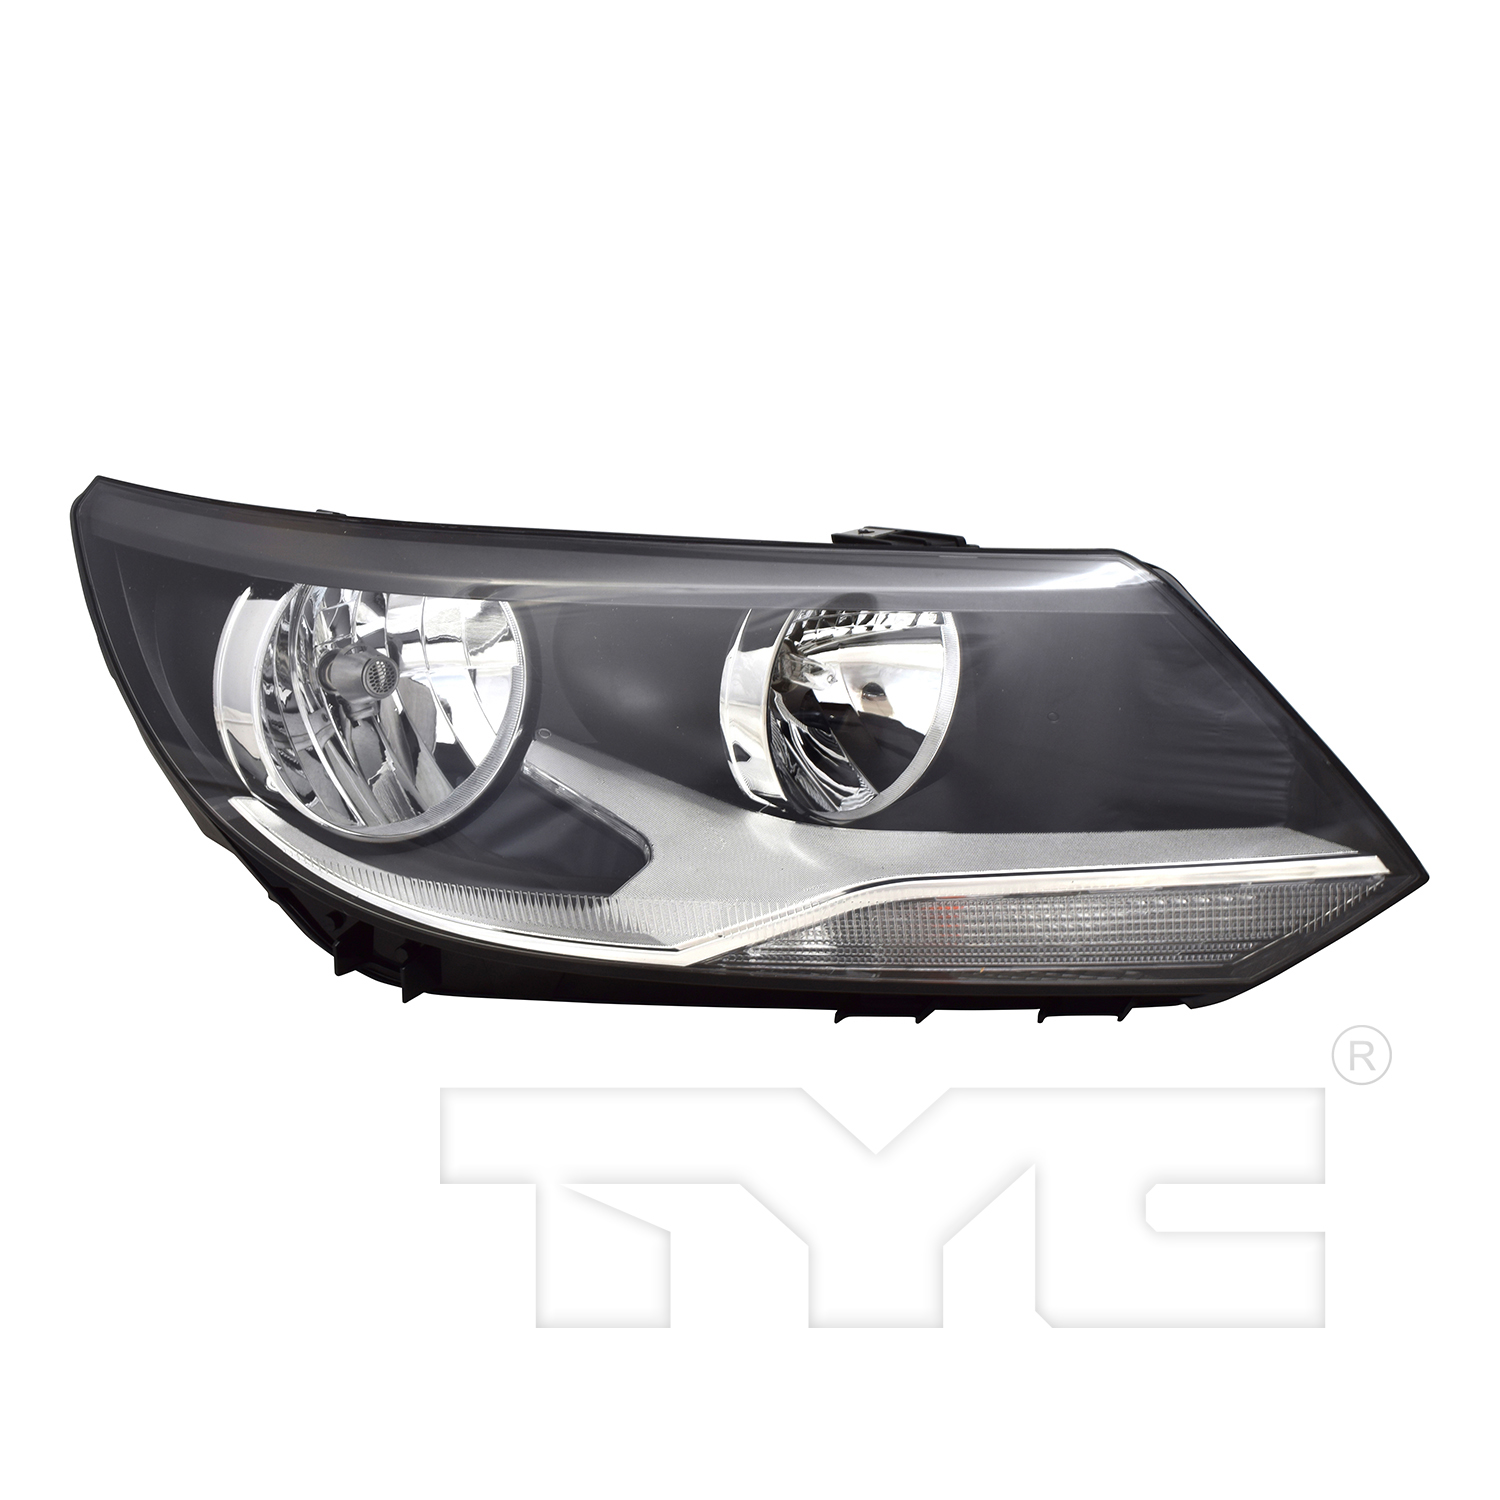 Aftermarket HEADLIGHTS for VOLKSWAGEN - TIGUAN LIMITED, TIGUAN LIMITED,17-18,RT Headlamp assy composite